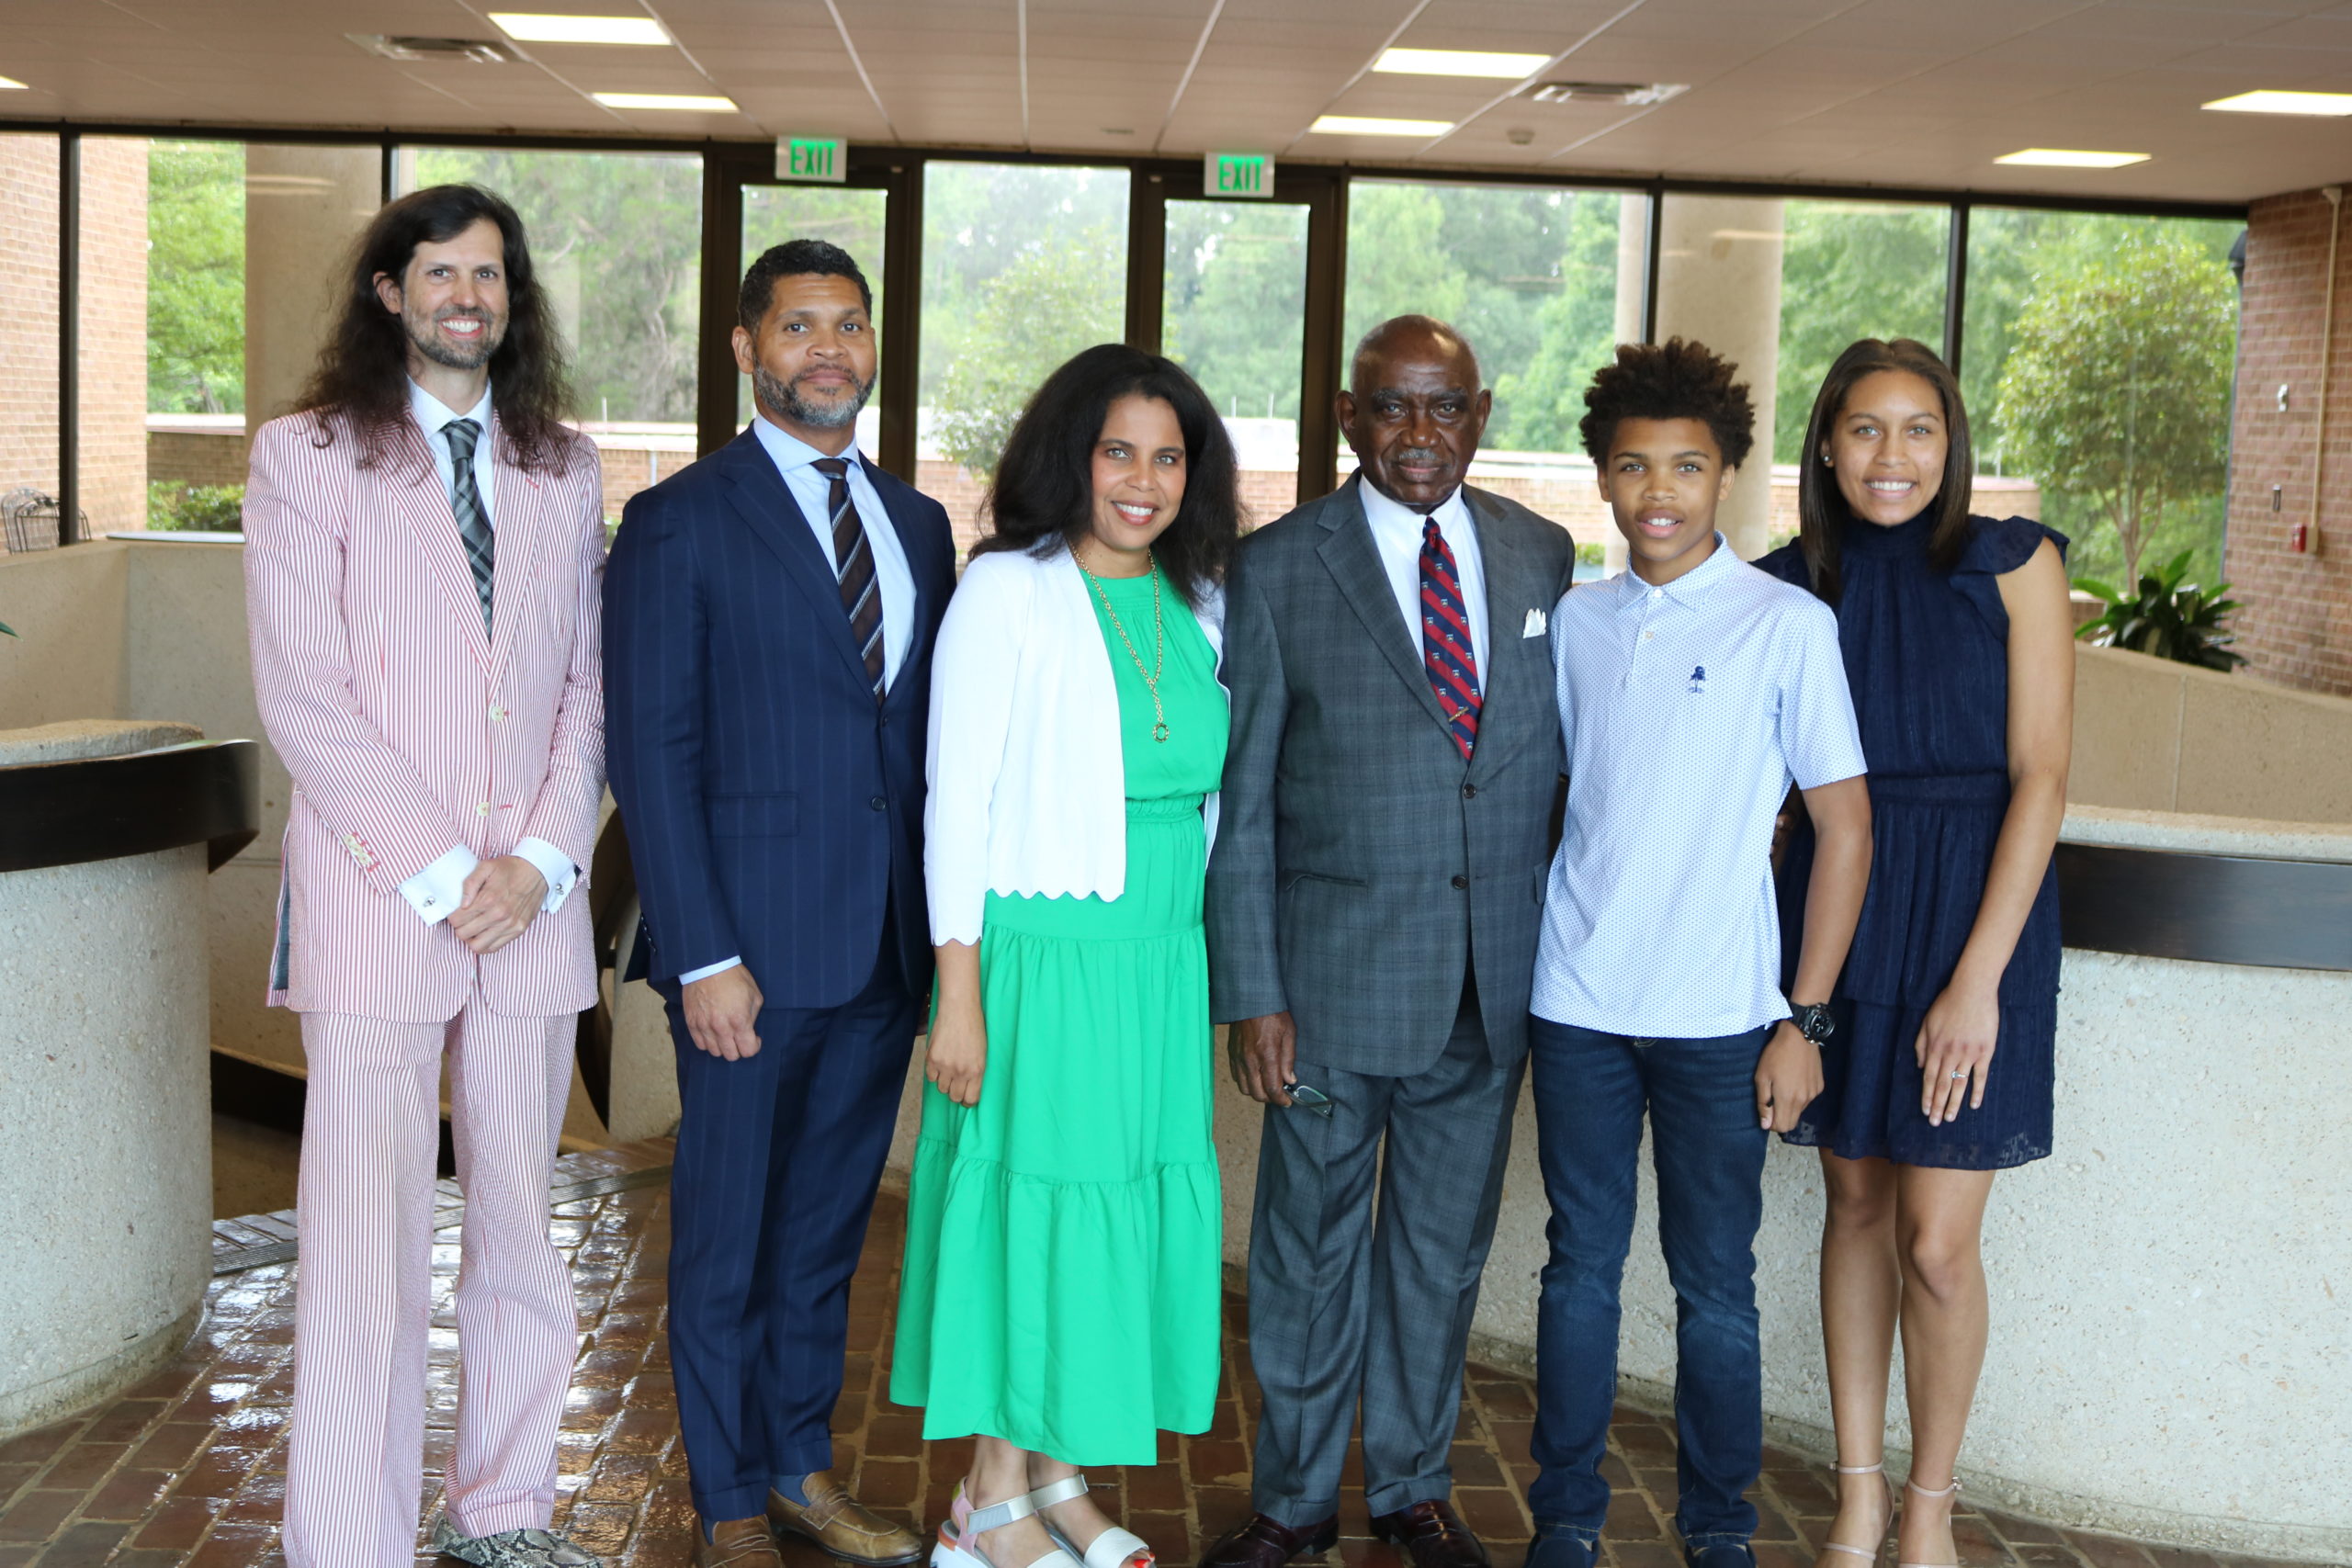 former US District Judge U.W. Clemon, Derrick Mills and family pose for picture with Professor Anil Mujumdar, Director of the Alabama Law Summer Scholars Program.